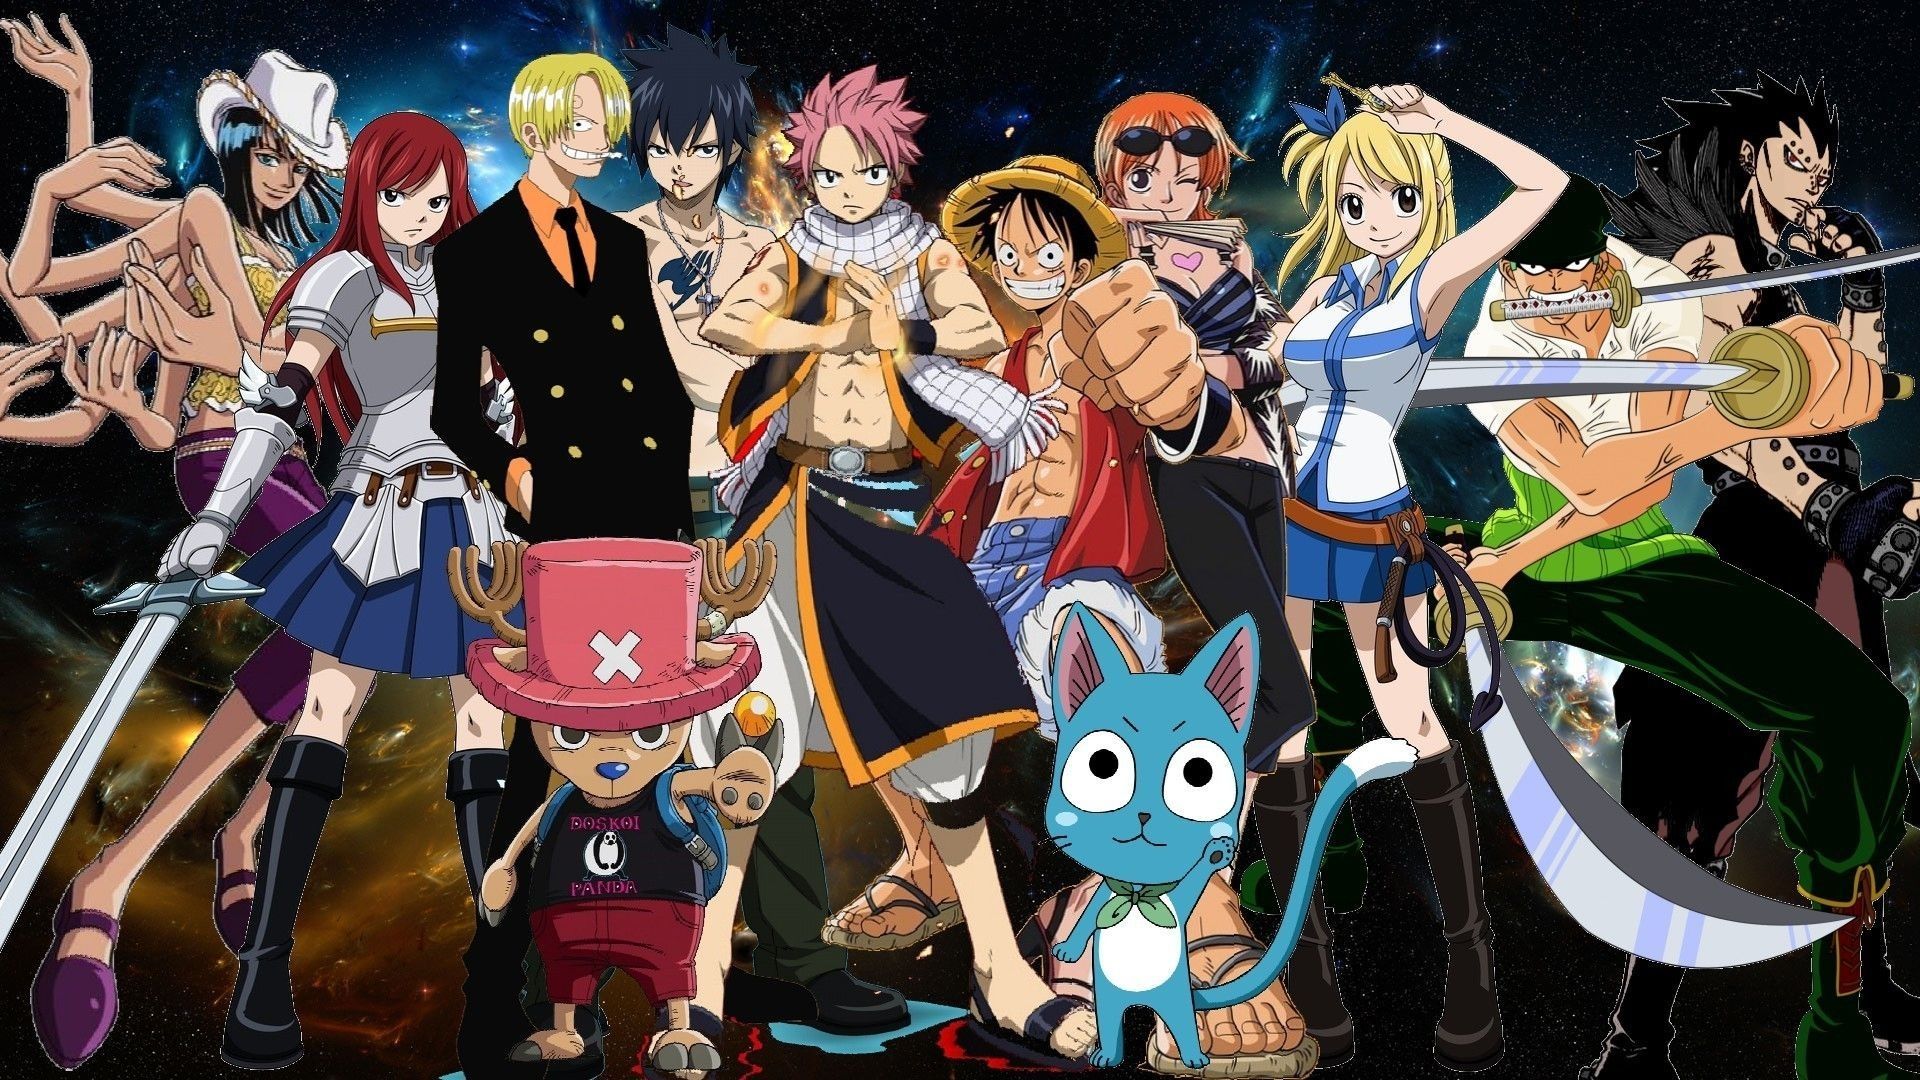 Fairy Tail Wallpapers For Free - Wallpaperforu